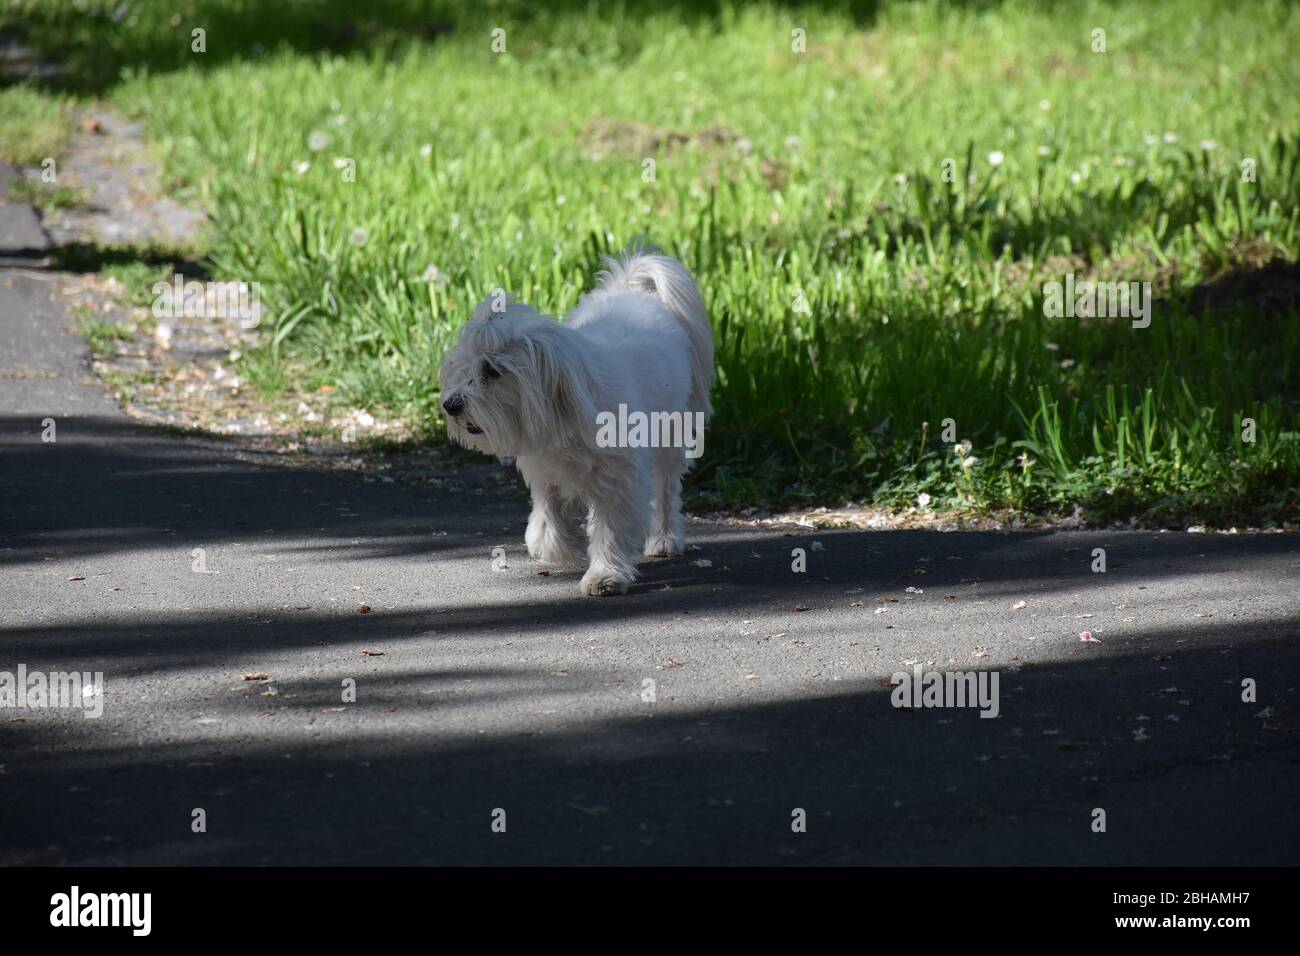 Racial stray dog. Walk on the asphalt road. The background is a blurred green background Stock Photo